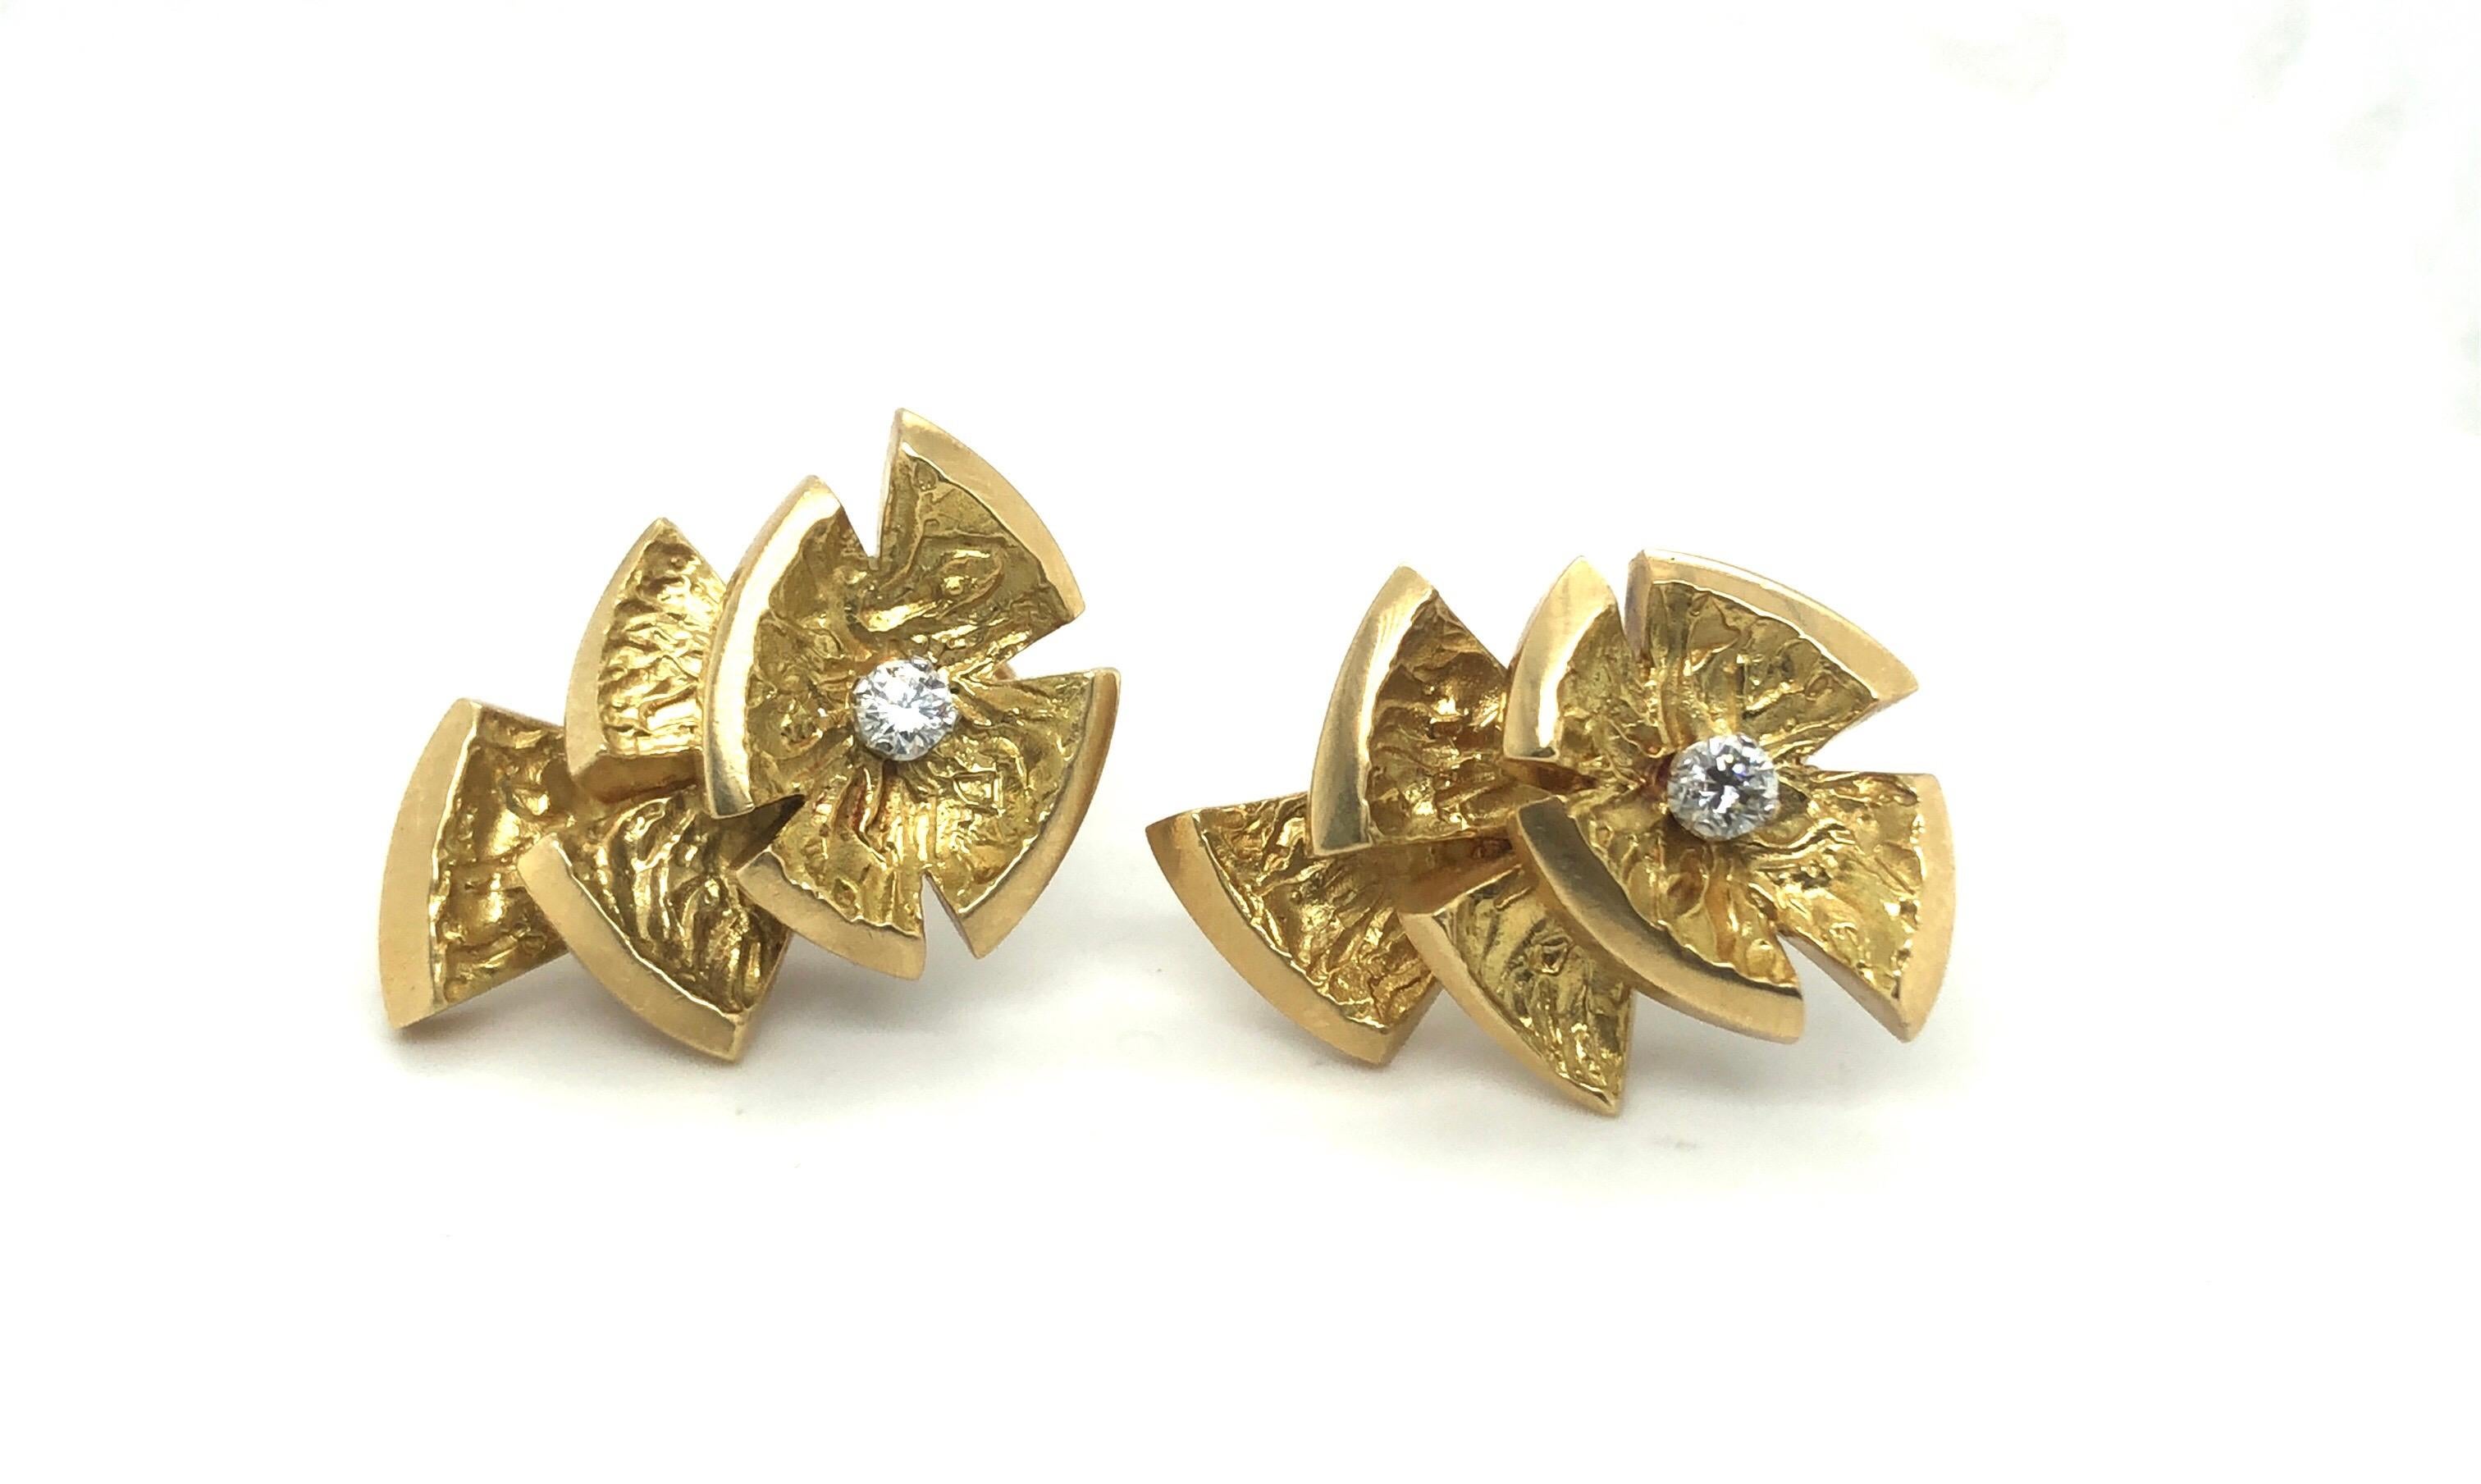 Stylish pair of 18 karat yellow gold and diamond earrings by André Vassort for Cartier, 1970s.
Crafted in 18 karat yellow gold and designed as stylized flowers with structured petals, each of the earrings is centered by a brilliant-cut diamond of